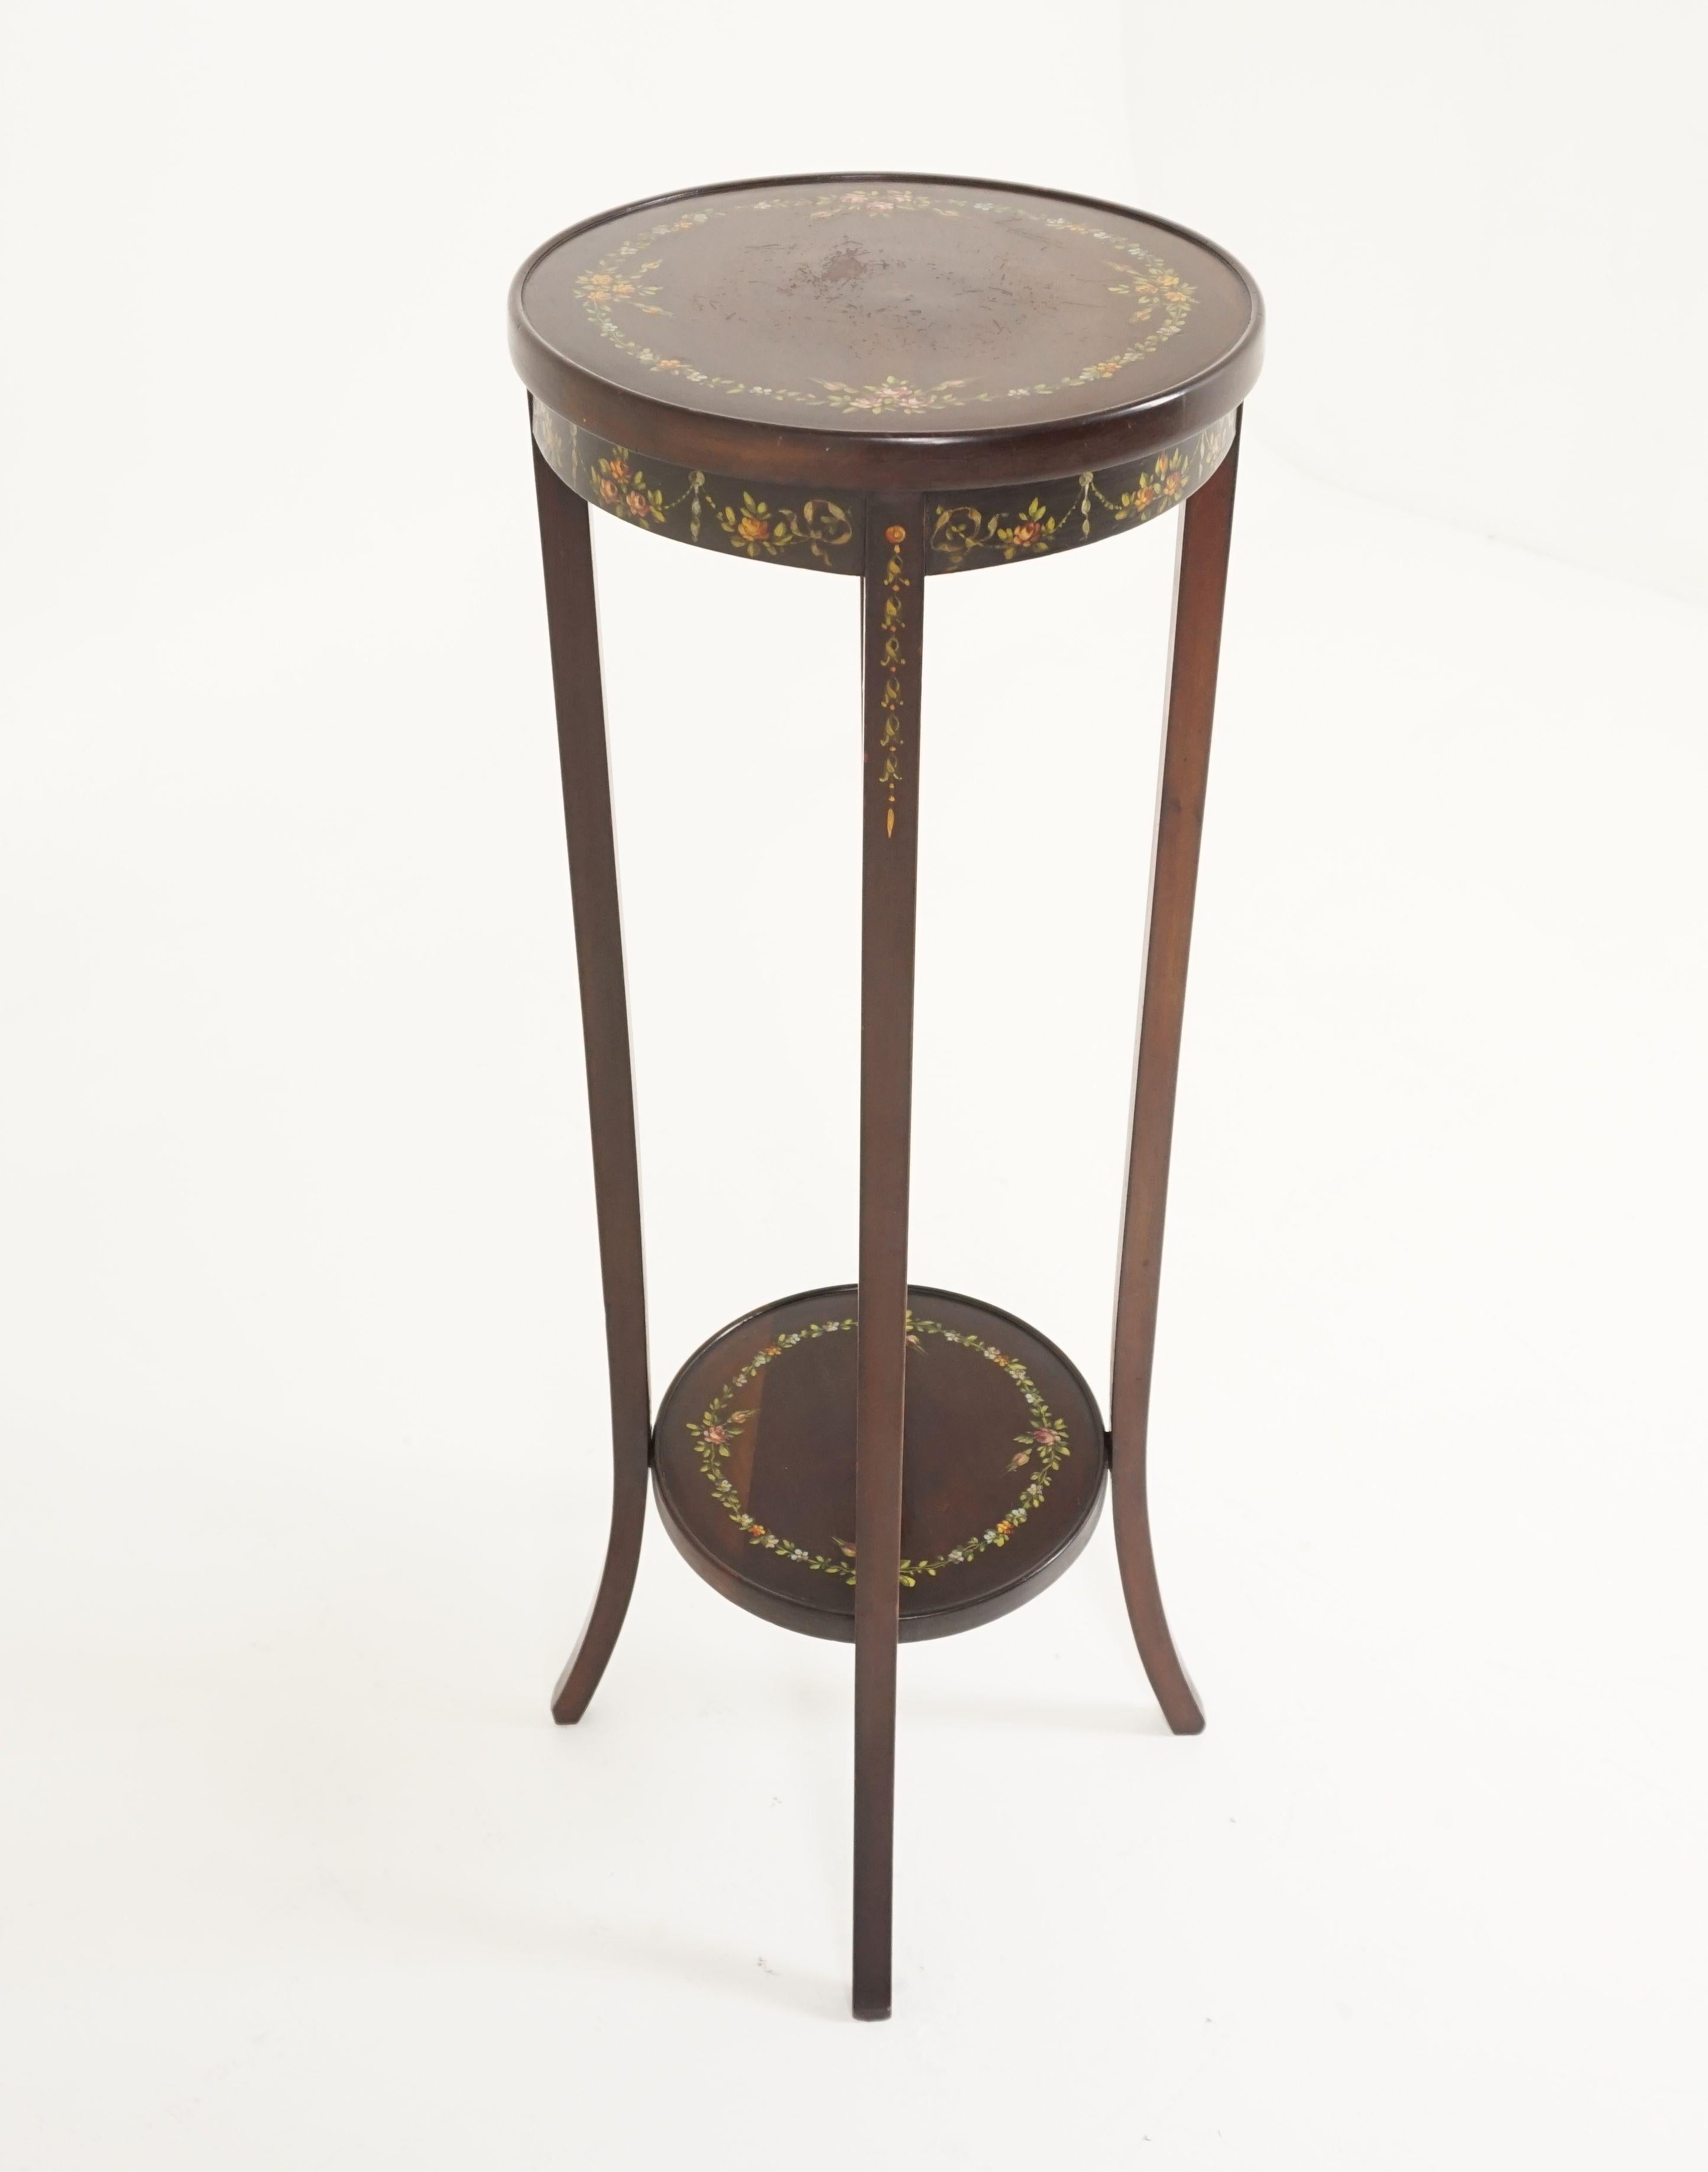 Antique circular walnut two-tier hand painted plant stand, Scotland 1920, B2046

Scotland, 1920
Solid walnut
Original finish
Circular top with painted flowers
Standing on four rectangular shaped legs
Circular under shelf below
Nice